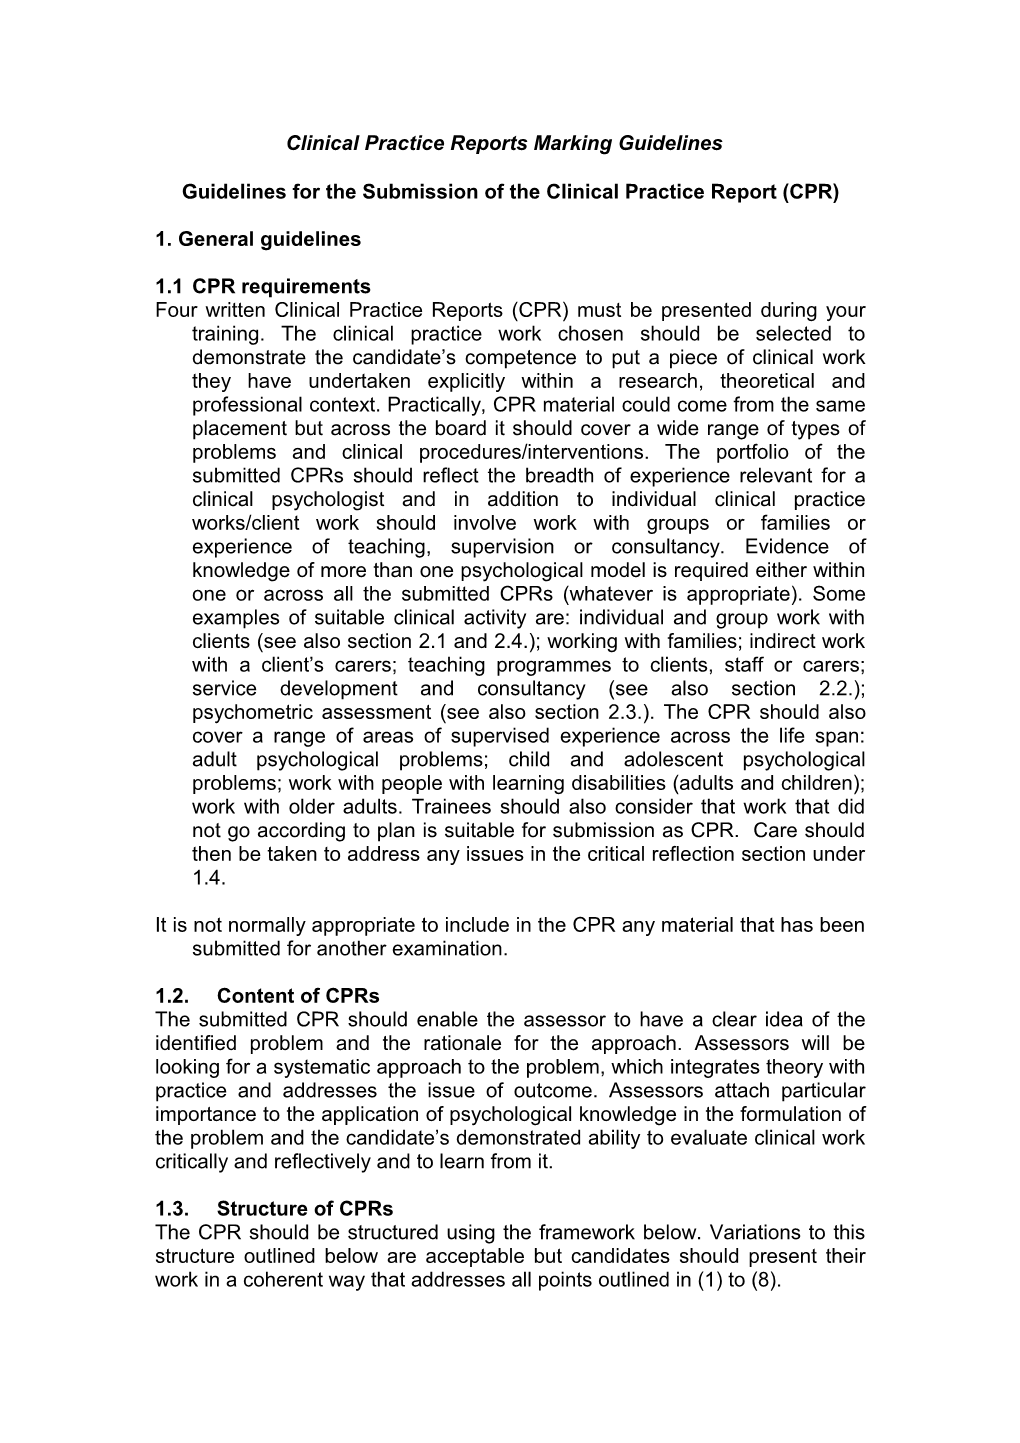 Guidelines for the Submission of the Clinical Practice Report(CPR)